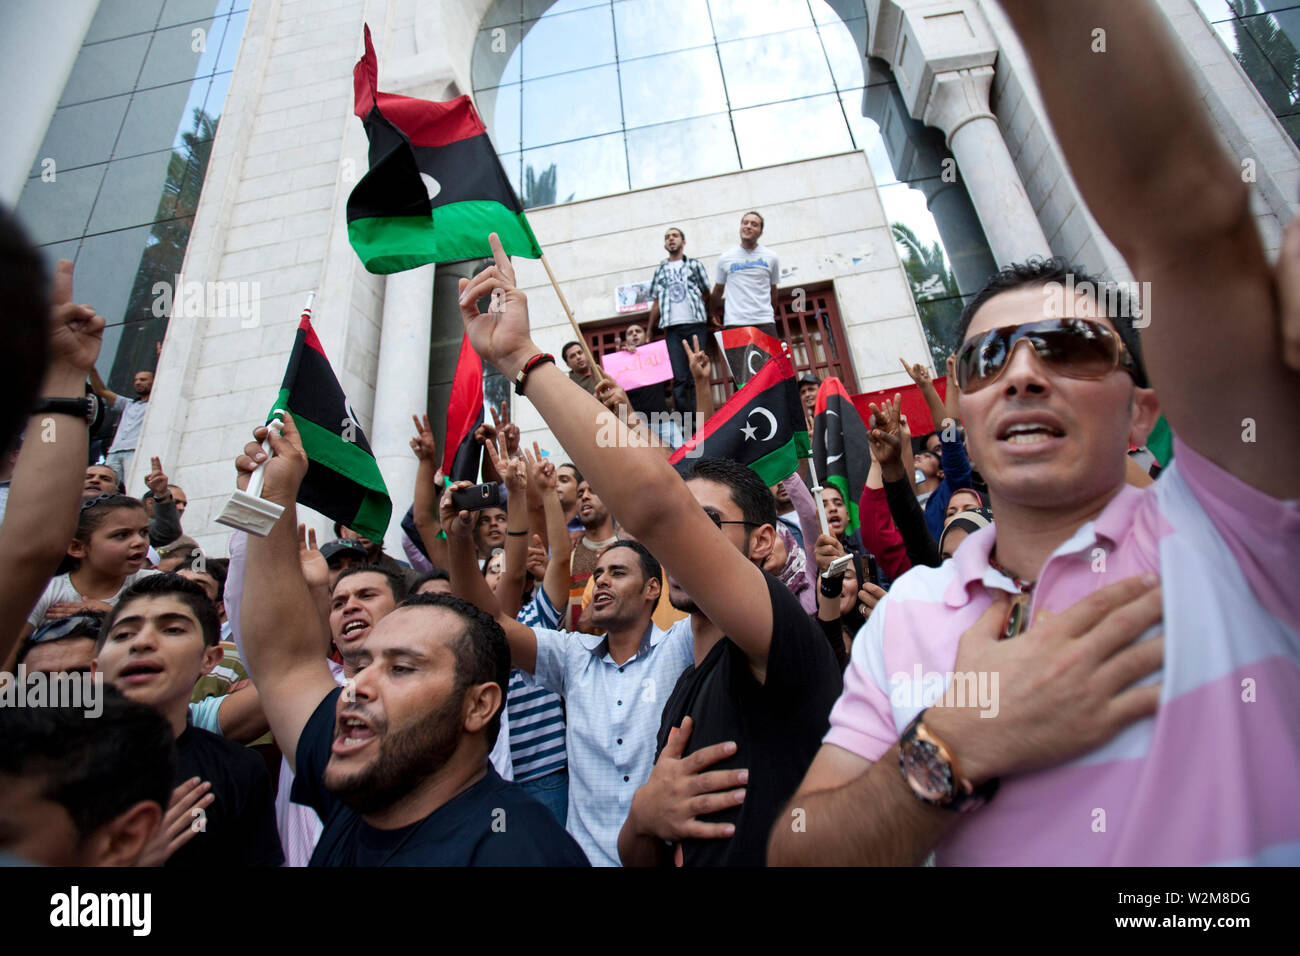 October 20, 2011 – Tunis, Tunisia - A number of Libyan nationals have gathered outside the Libyan embassy in Tunis, to celebrate the reports that Muammar Gaddafi had been captured, possibly killed in his home town of Sirt, where rebels have fought a grueling battle for weeks to crush his remaining armed loyalists. Photo credit: Benedicte Desrus Stock Photo